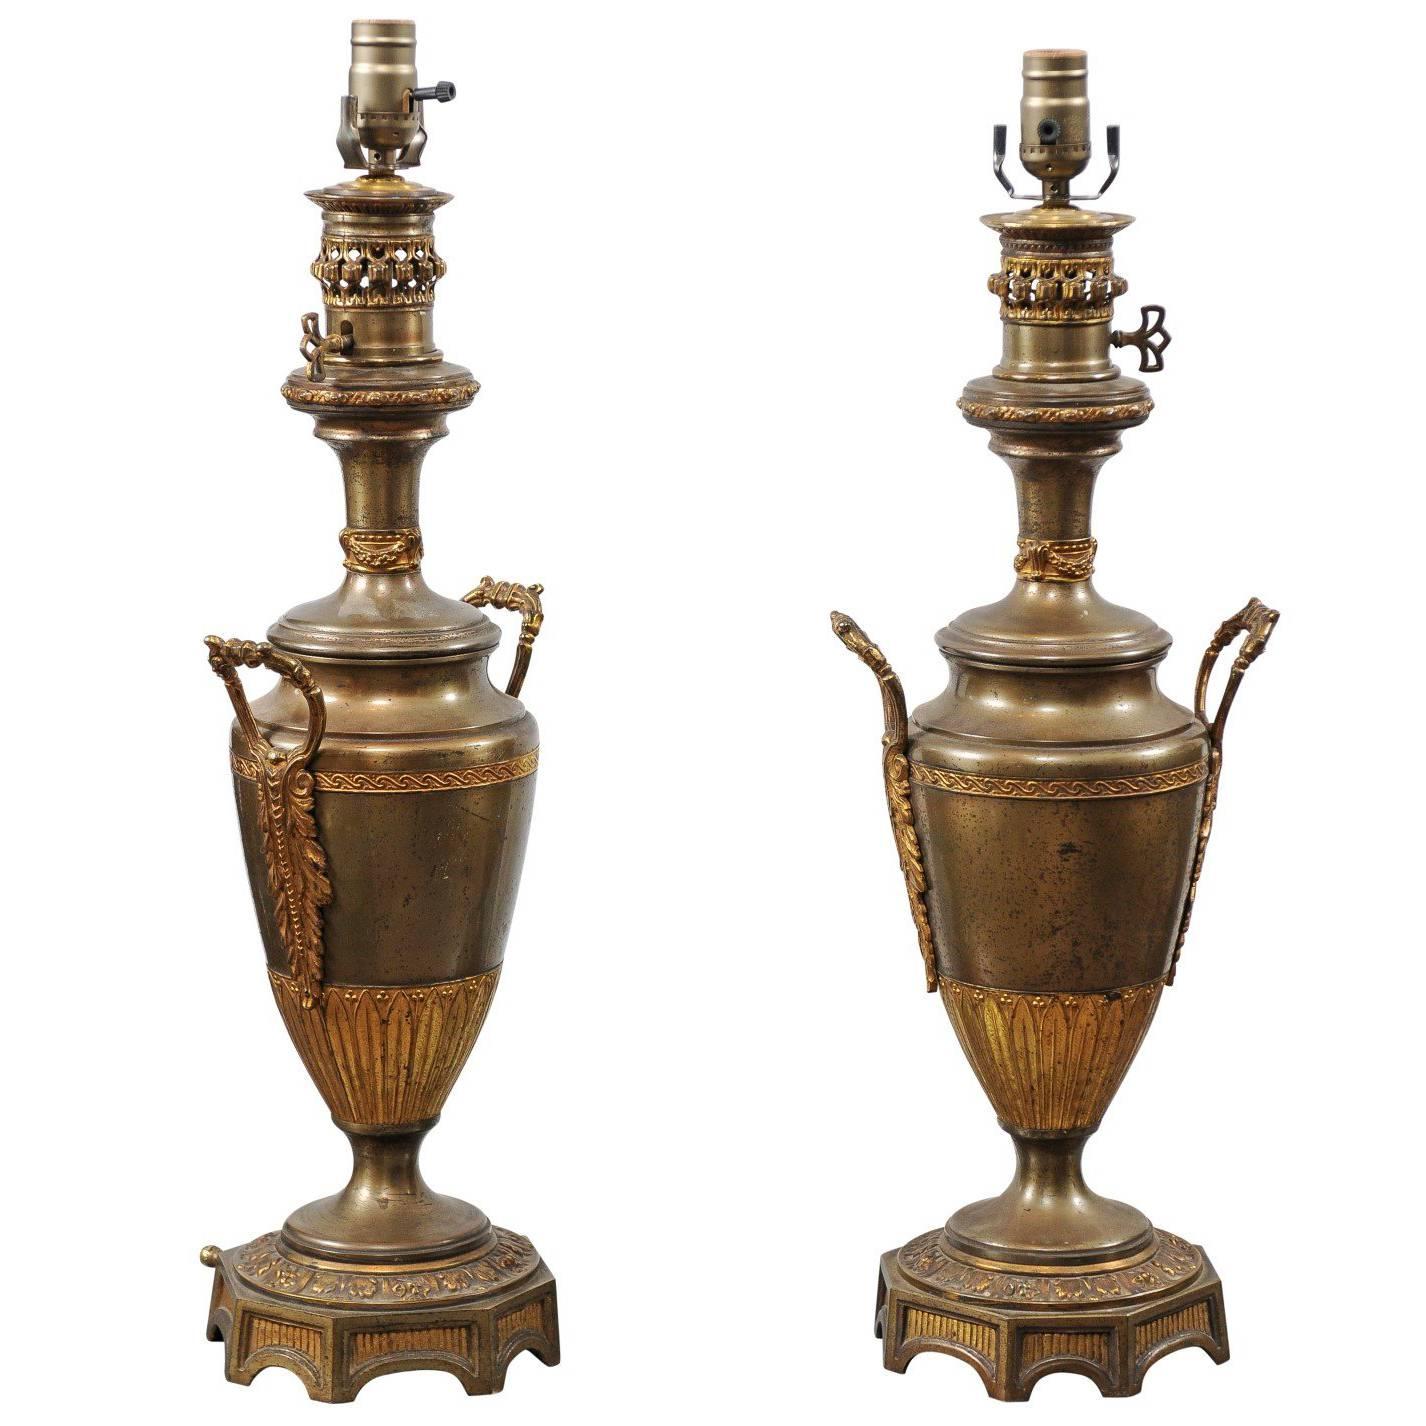 Pair of Neoclassical Style French Gilt Metal Urn Lamps, circa 1880